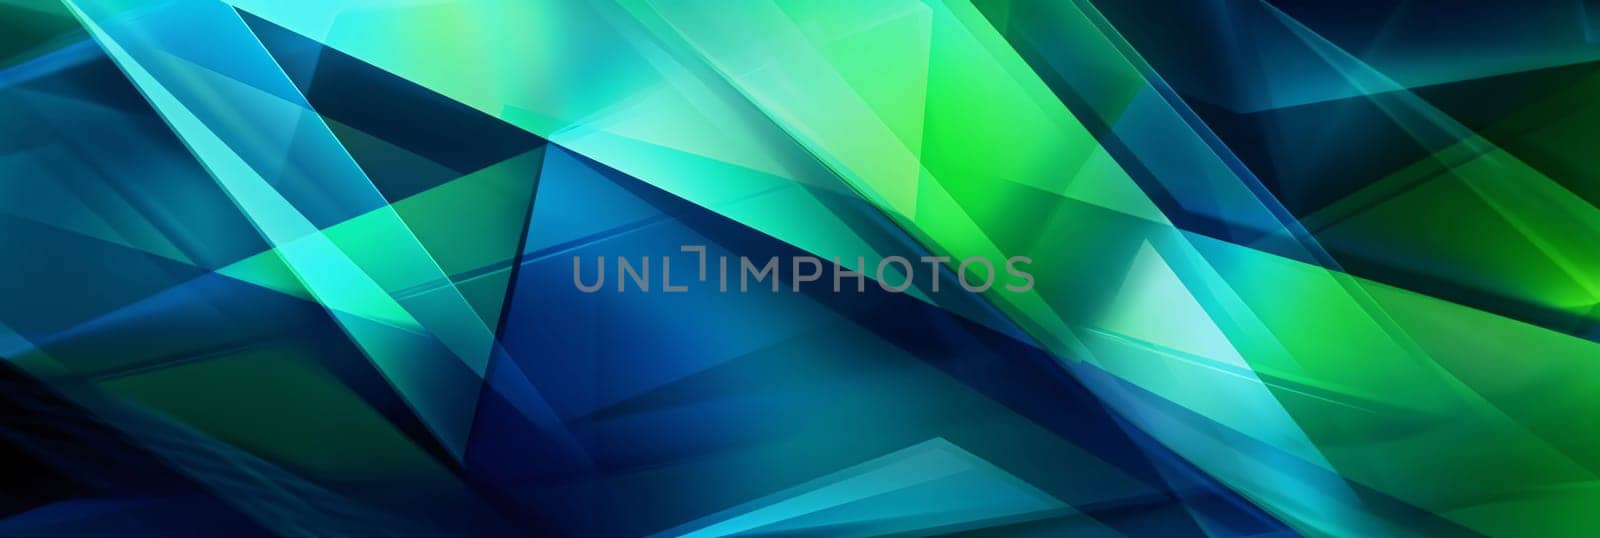 Abstract background design: Triangle abstract background. Vector illustration for covers, banners, flyers and posters and other